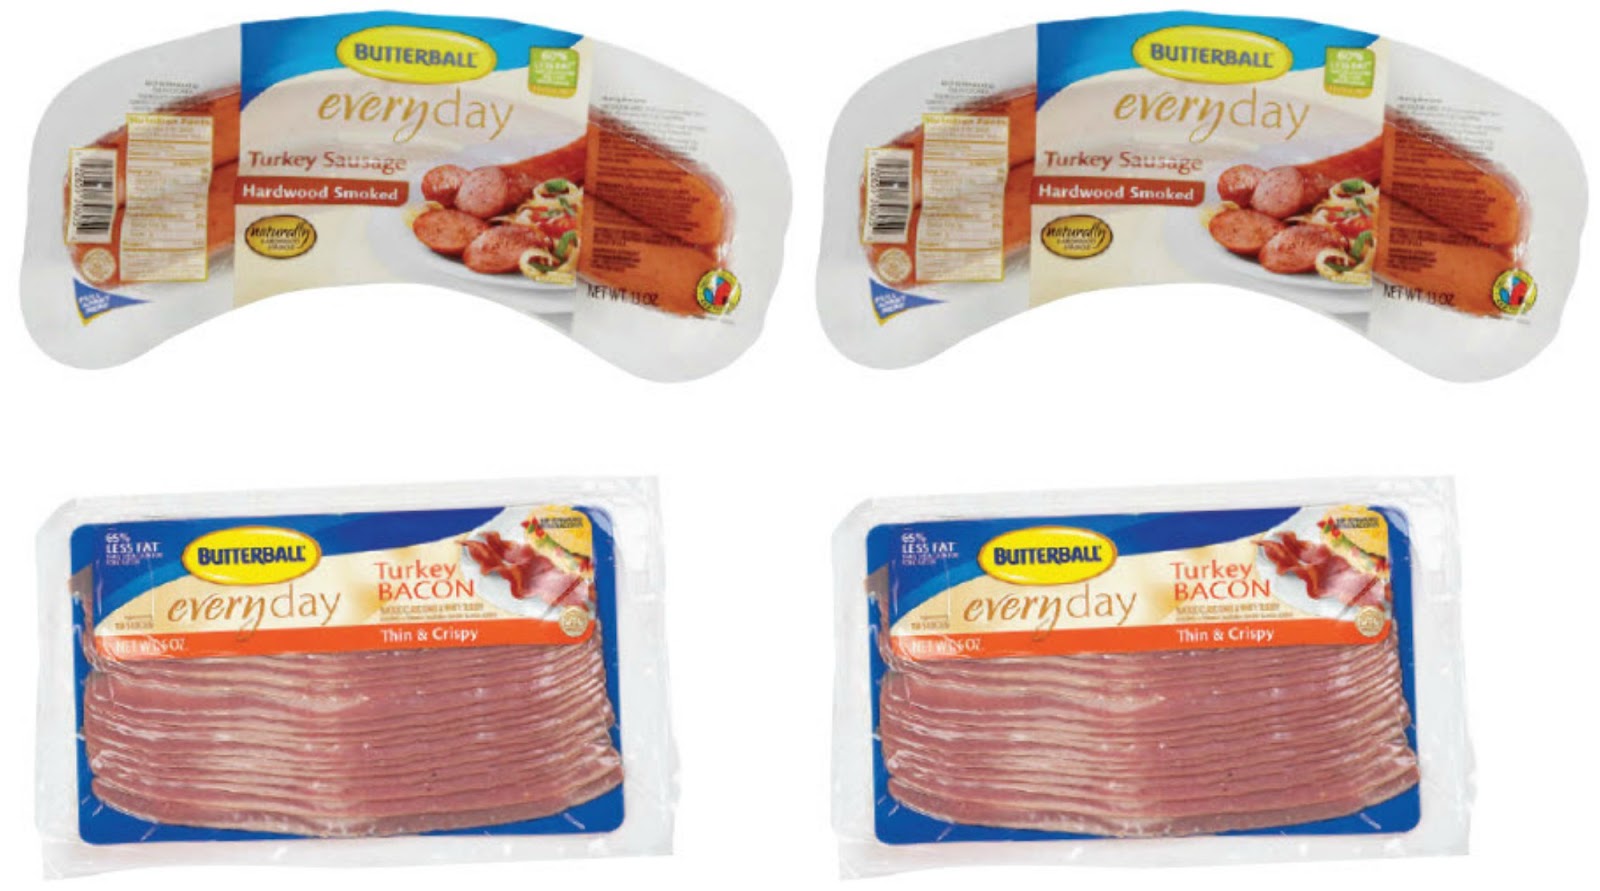 Butterball Turkey Sausage Only 52 Cents Each (Usually $2.28!)